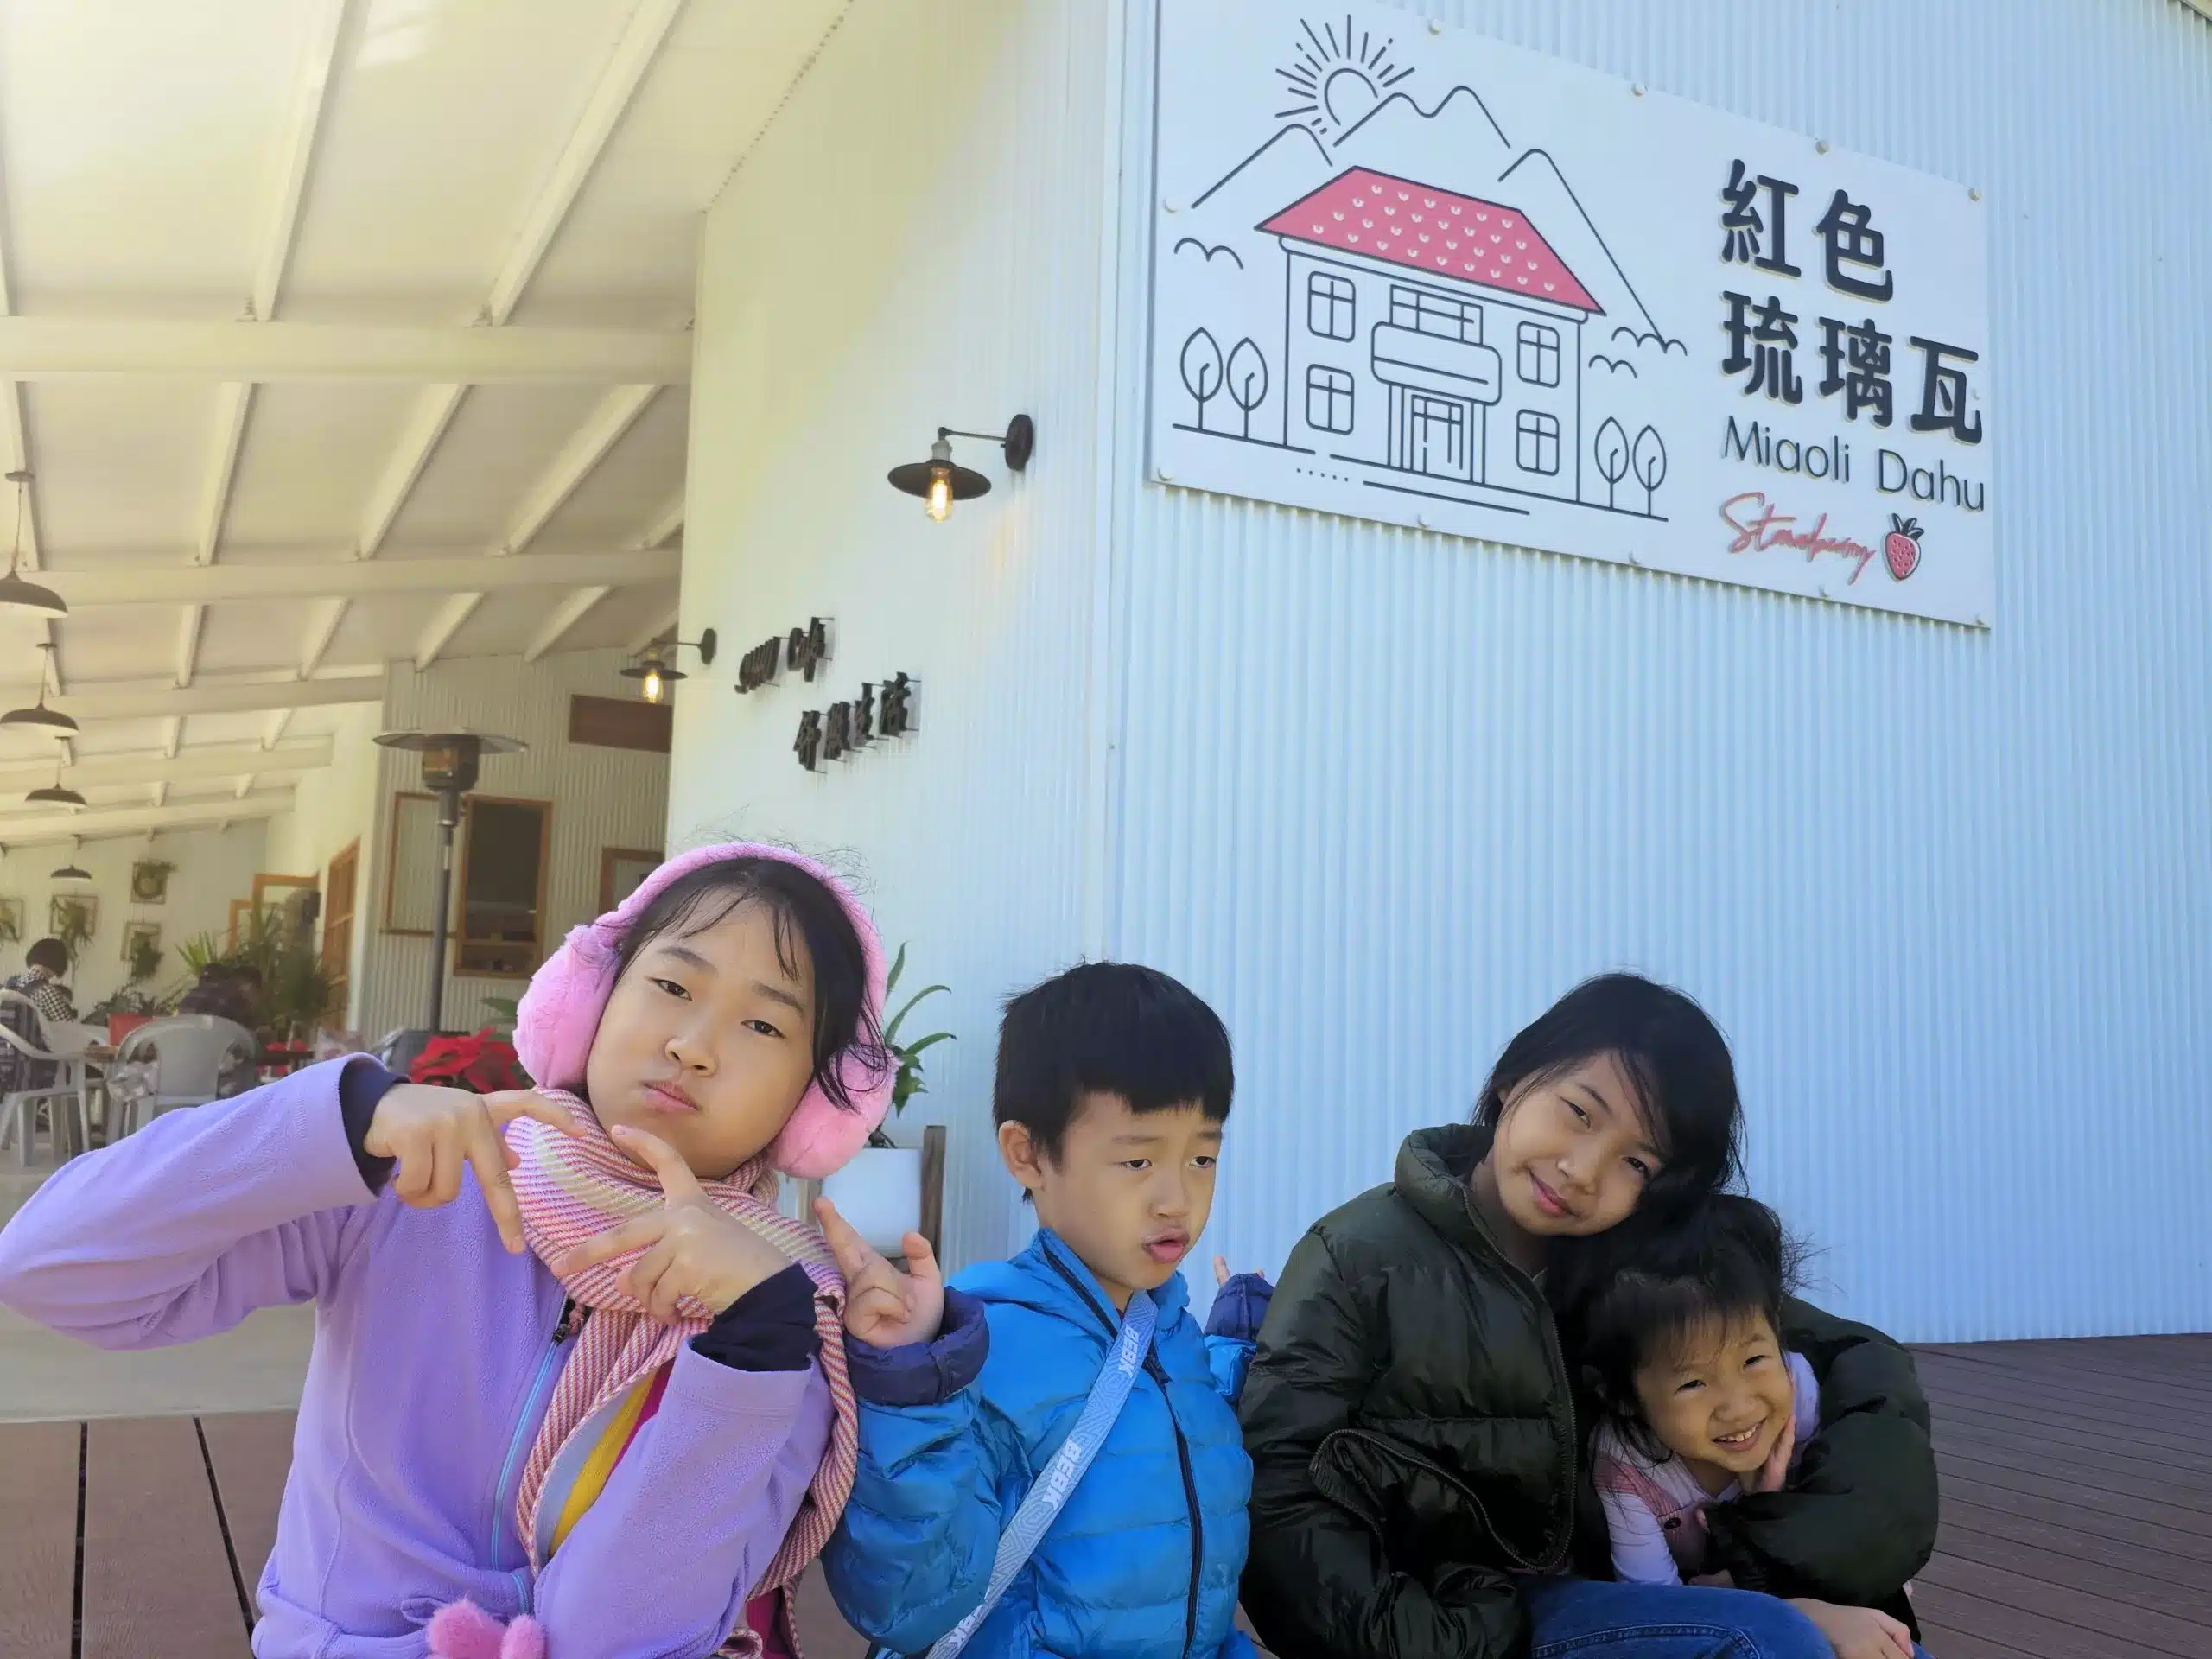 Family-friendly Attractions and Accommodations in Miaoli - Dahu 21